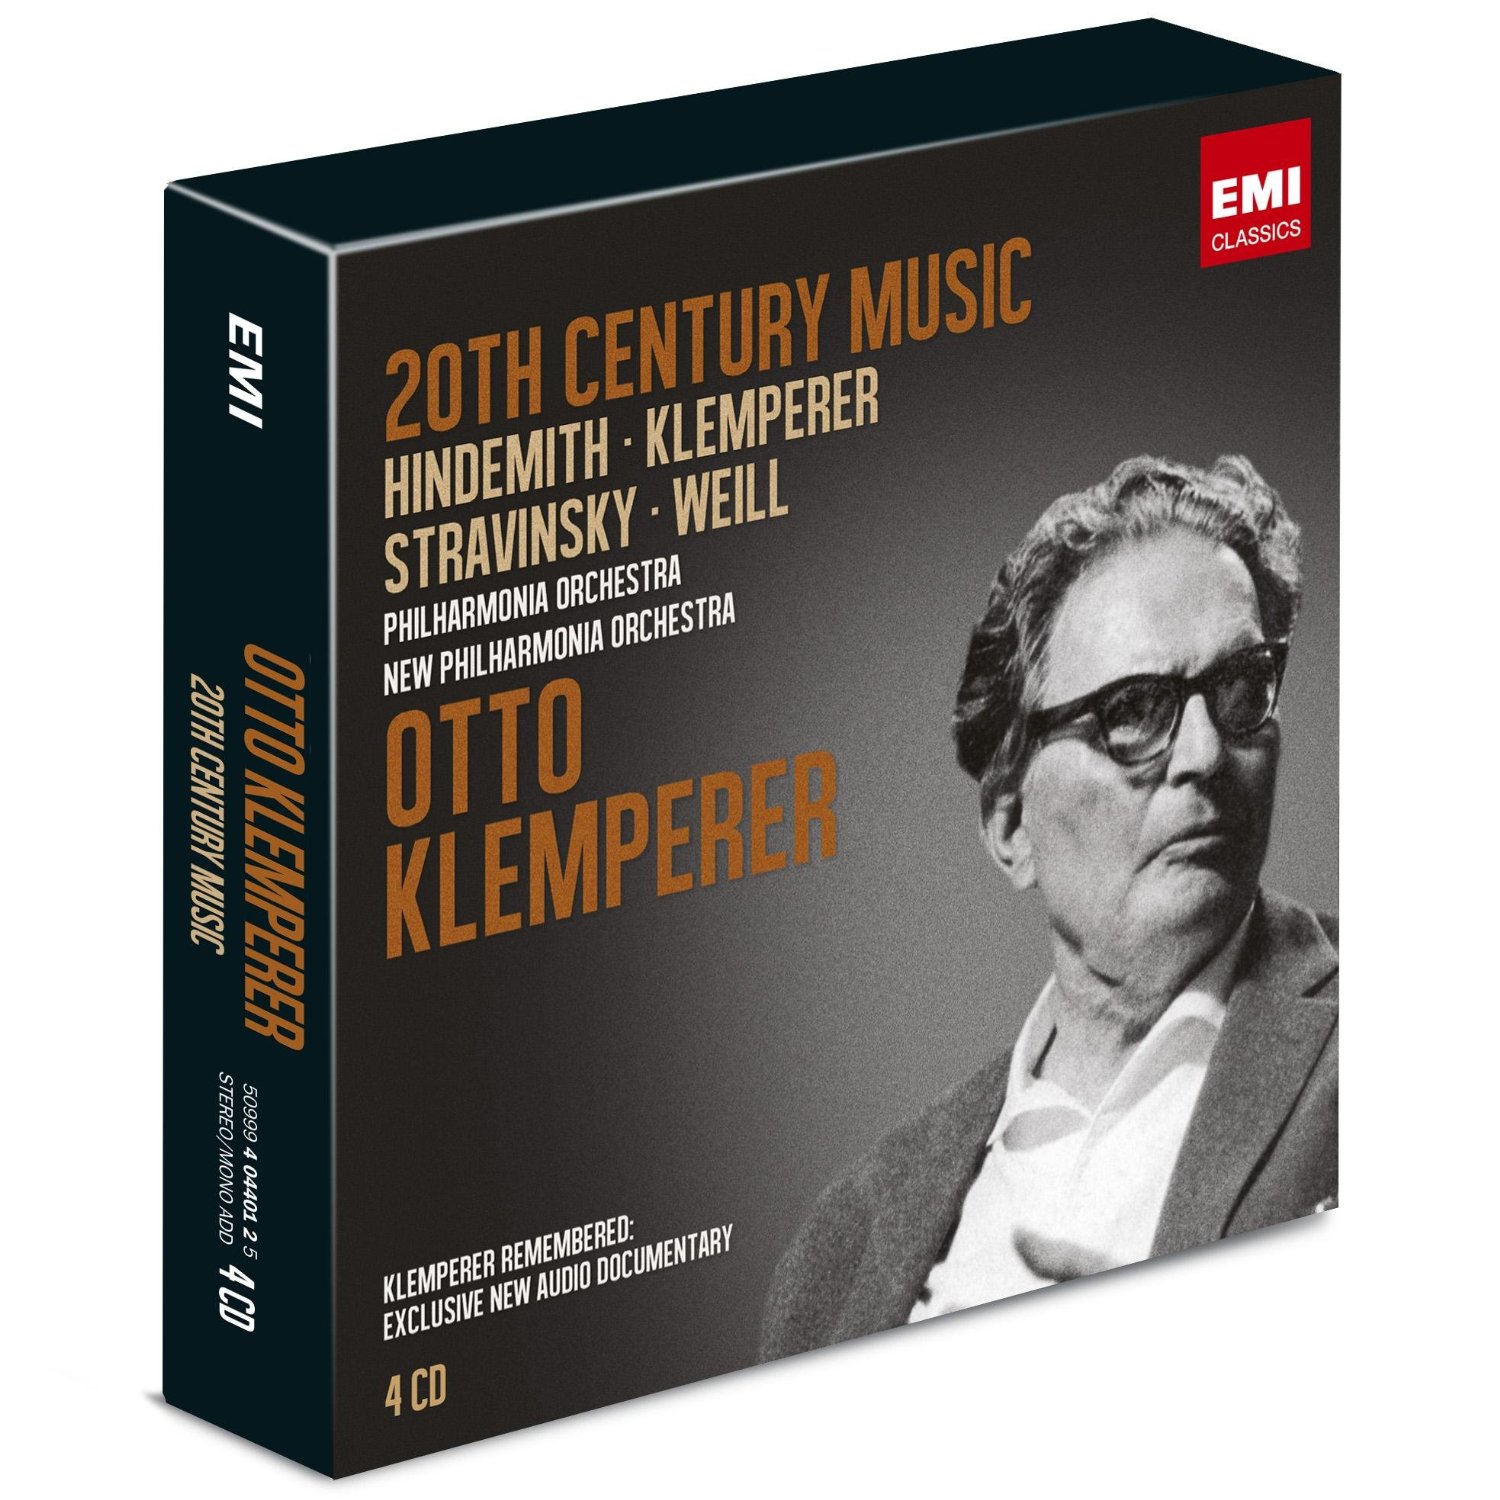 EMI New Release 20th Century Music box-set, conducted by Otto Klemperer